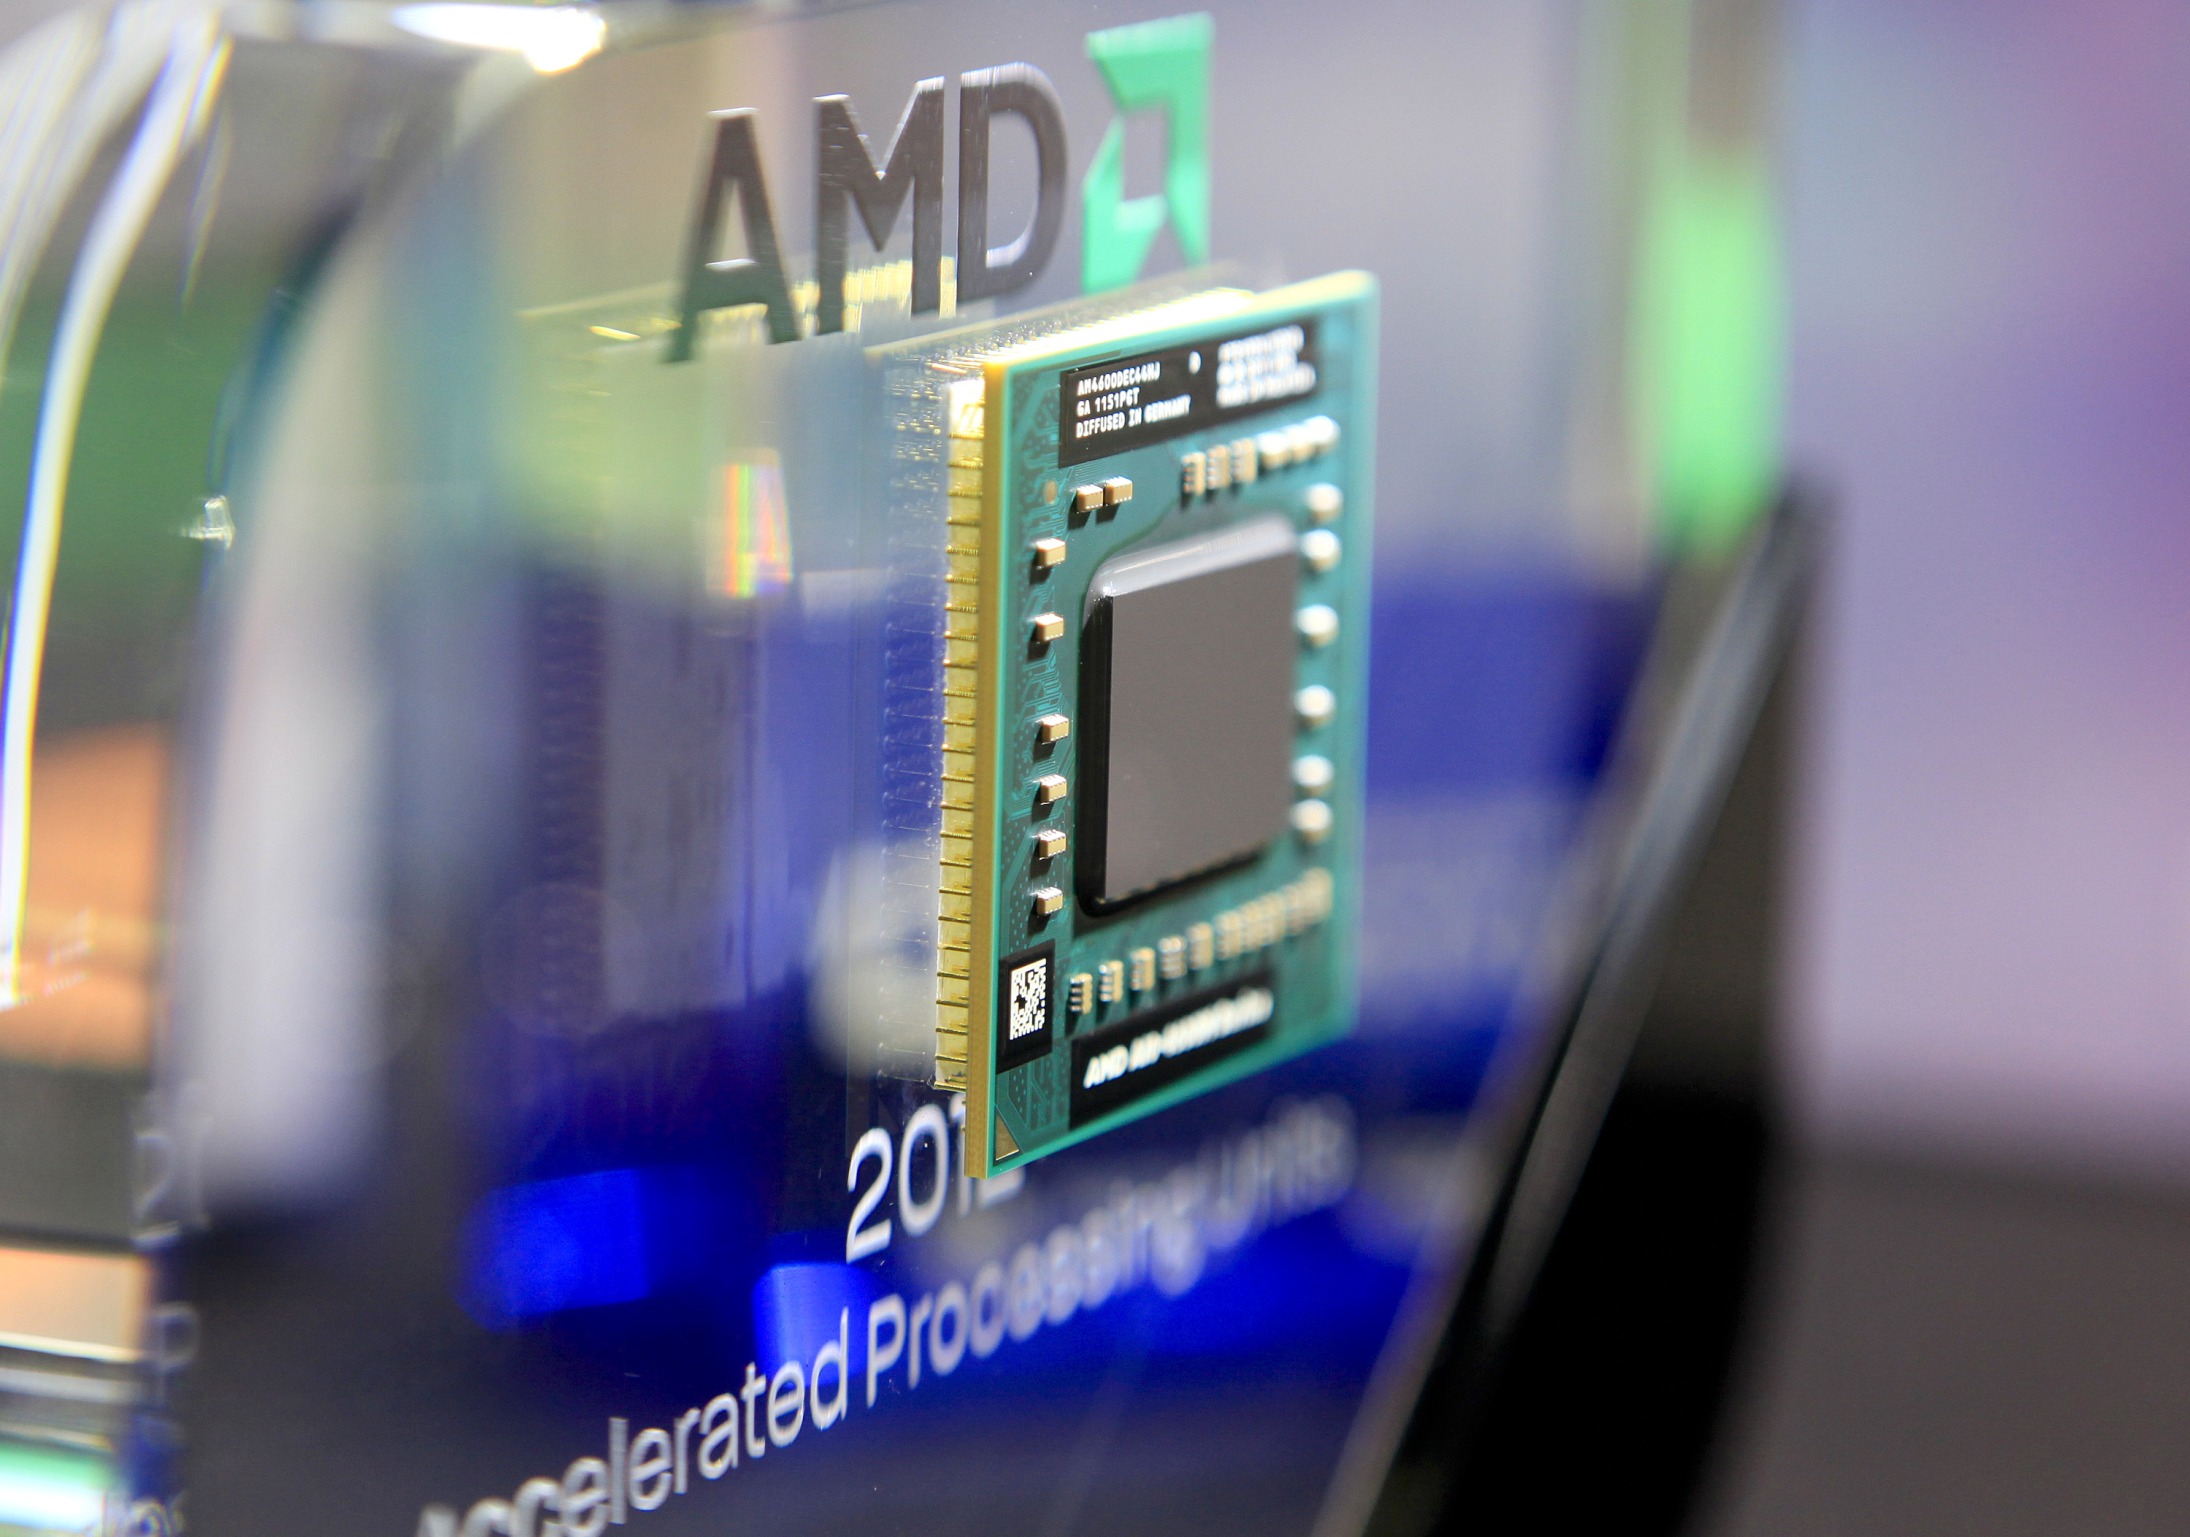 AMD Rises to Highest in 12 Years, Bucking Rest of Chip Stocks